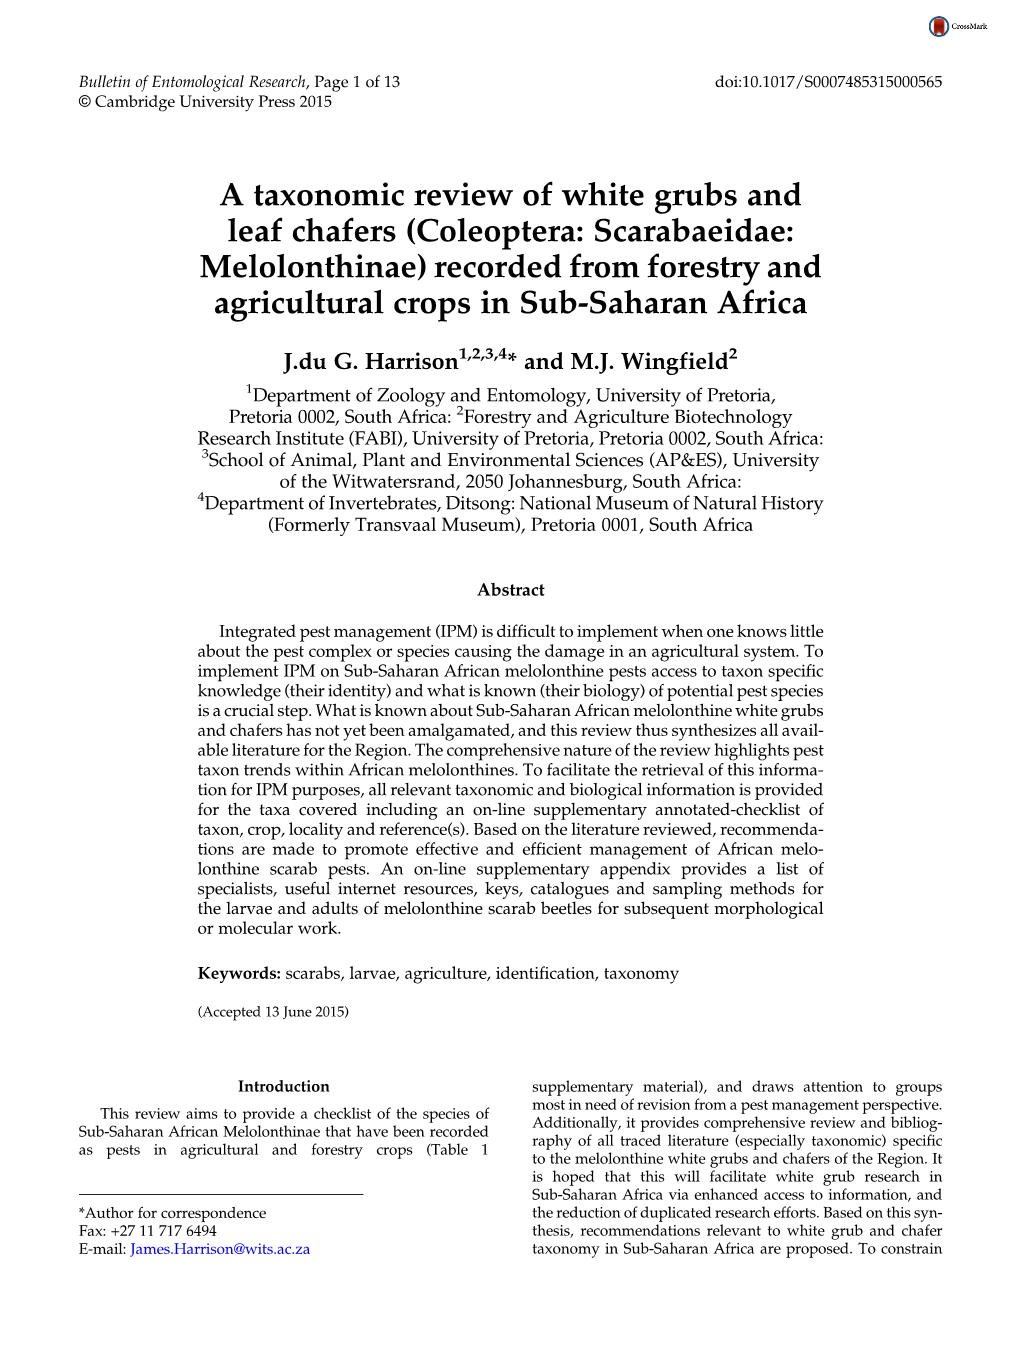 A Taxonomic Review of White Grubs and Leaf Chafers (Coleoptera: Scarabaeidae: Melolonthinae) Recorded from Forestry and Agricultural Crops in Sub-Saharan Africa